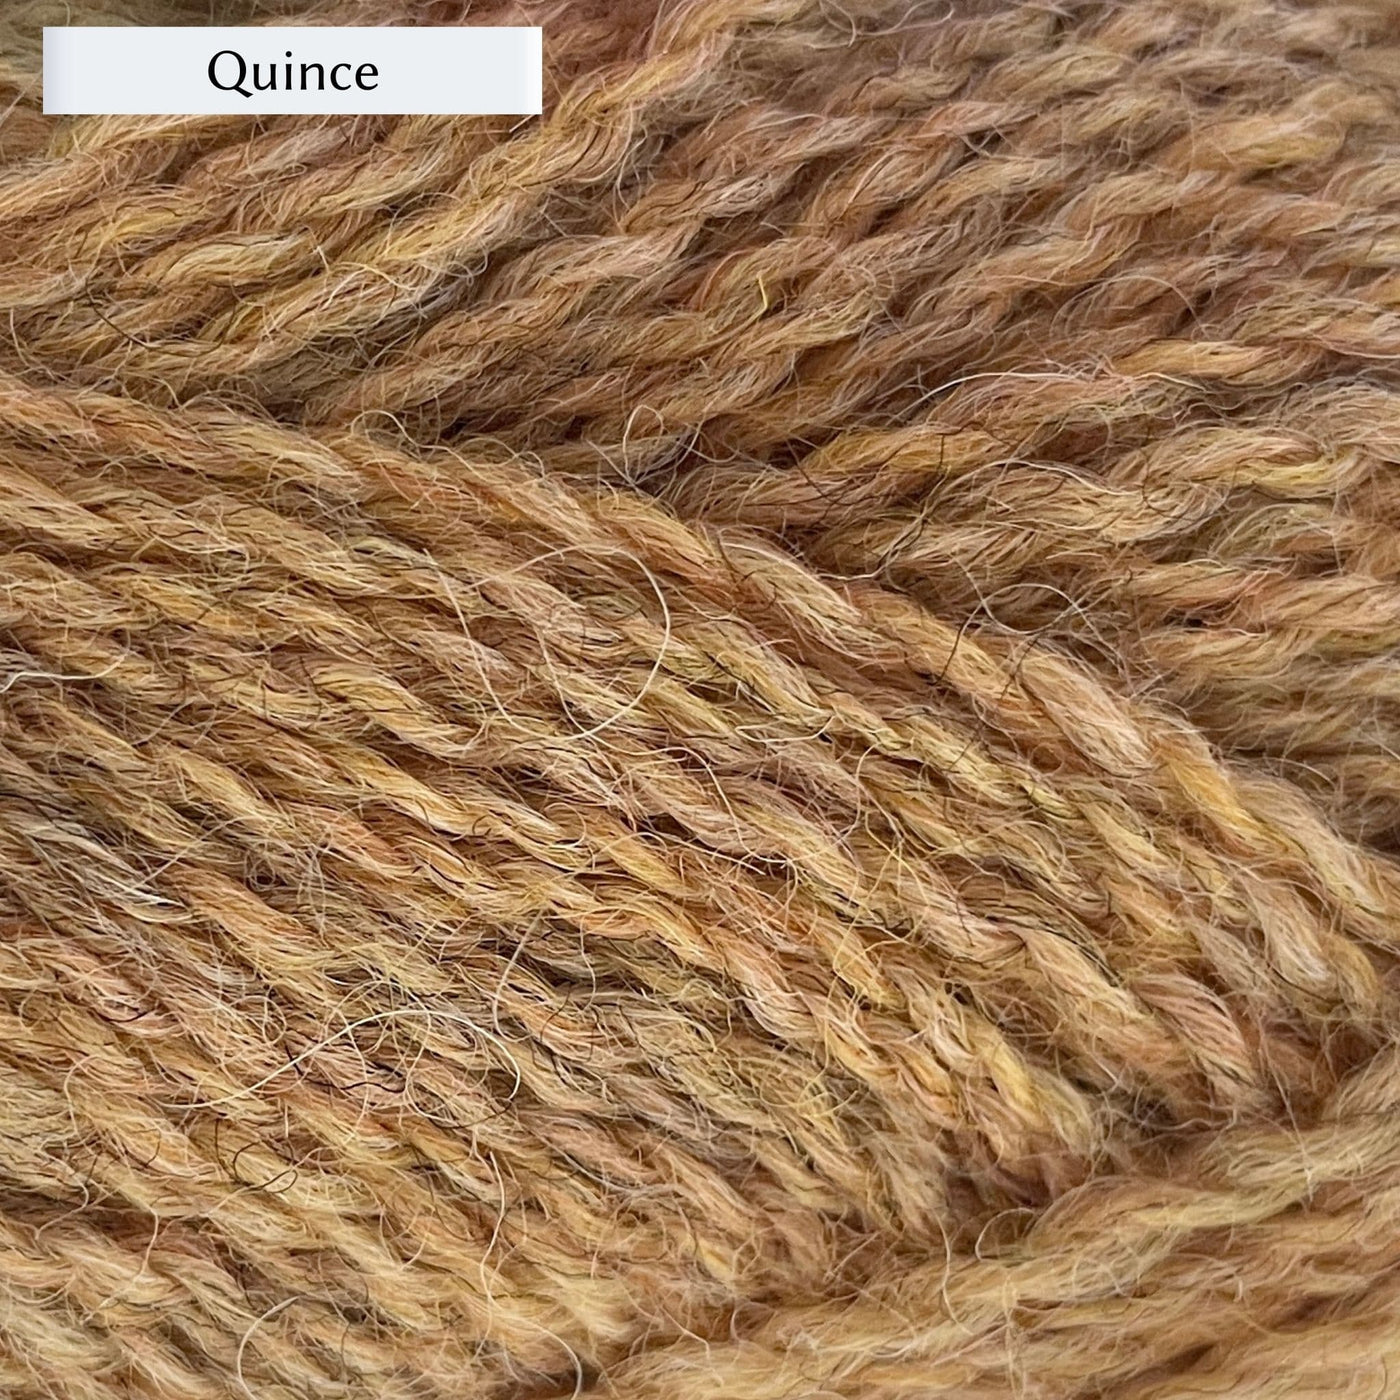 Marie Wallin's British Breeds yarn, a fingering weight, in color Quince, a warm straw yellow